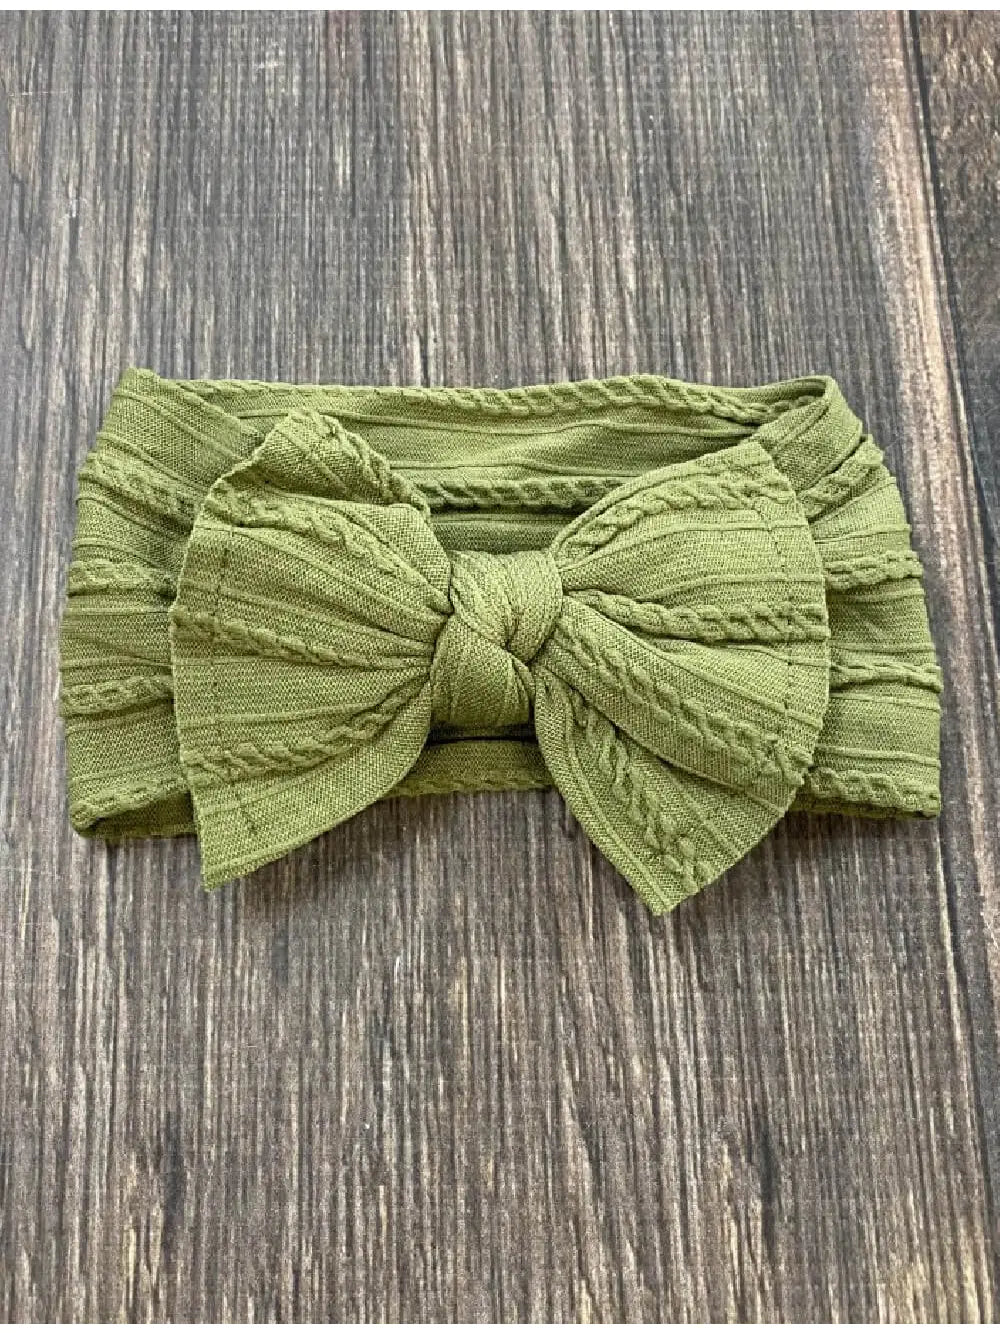 Cable Knit Bow Headband - Multiple Colors